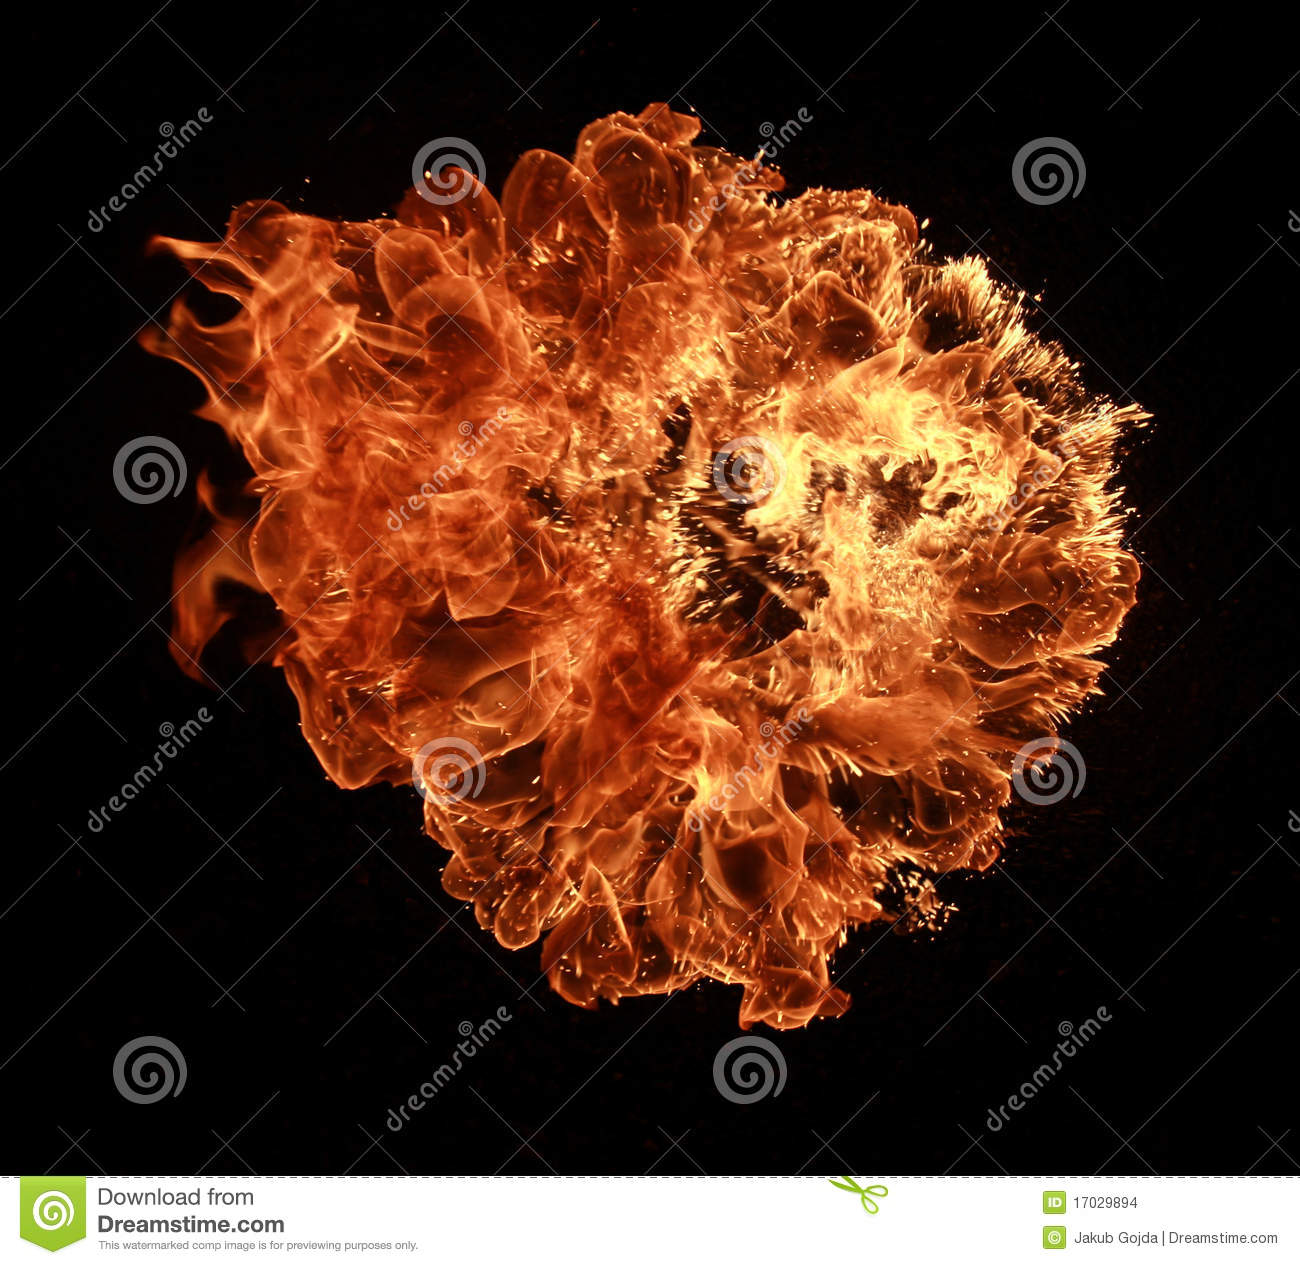 Fire Explosion Clipart Fire Explosion Isolated On